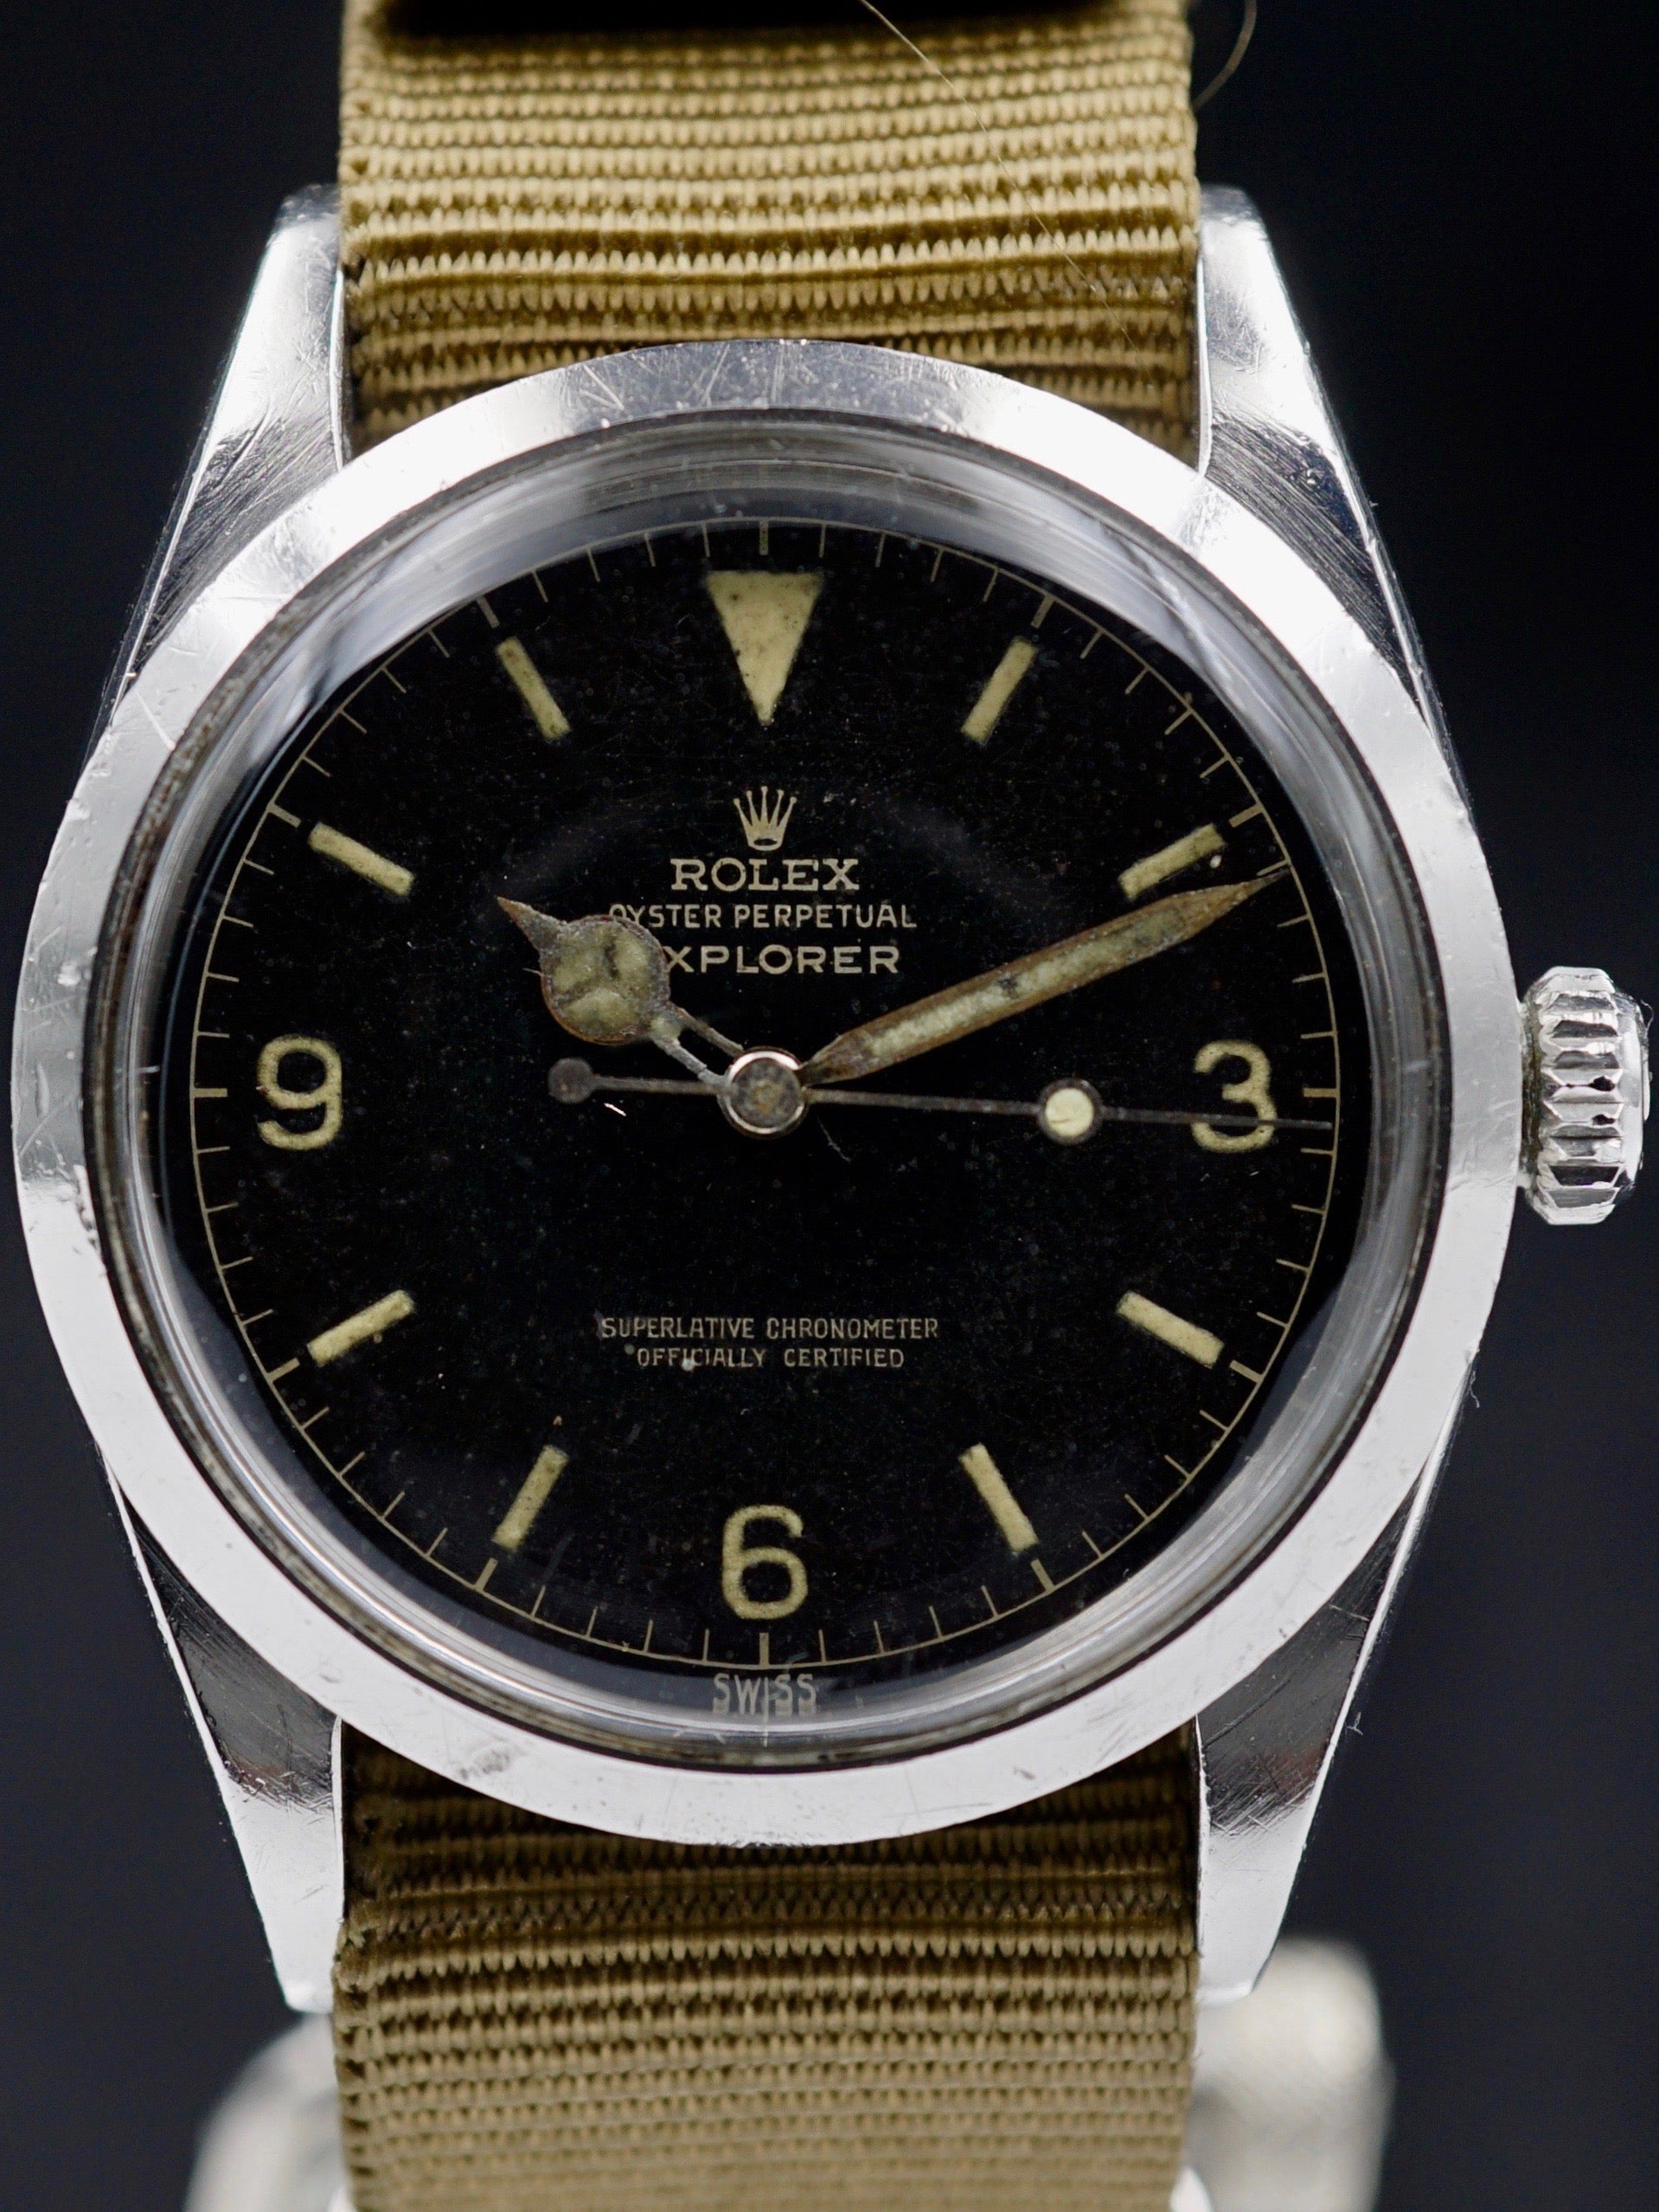 1960 Rolex Explorer I (Ref. 1016) "SWISS only" Chapter Ring